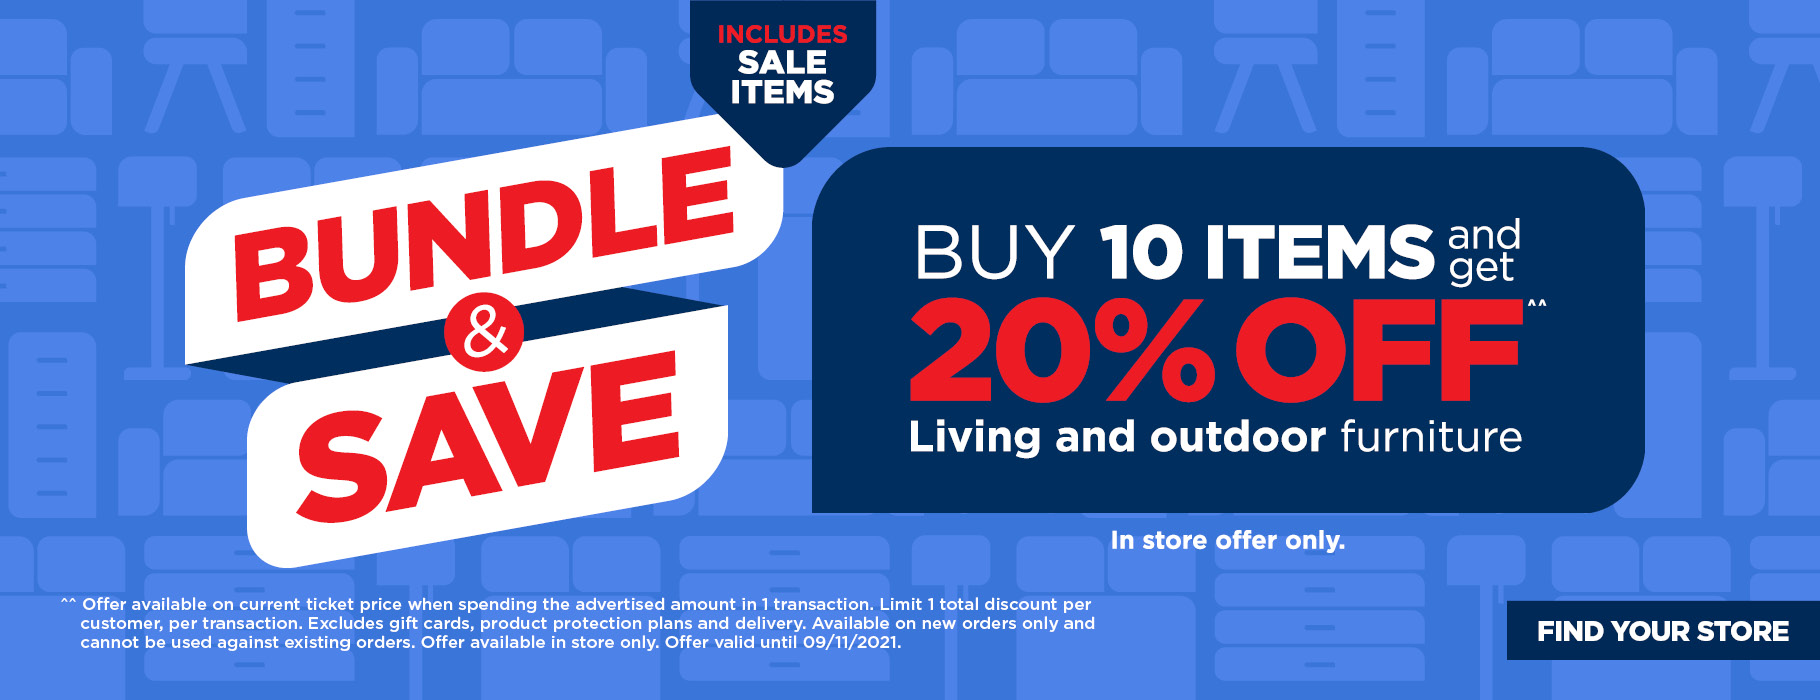 Save 20% OFF when you buy 10 items on living & outdoor furniture(In-store offer)